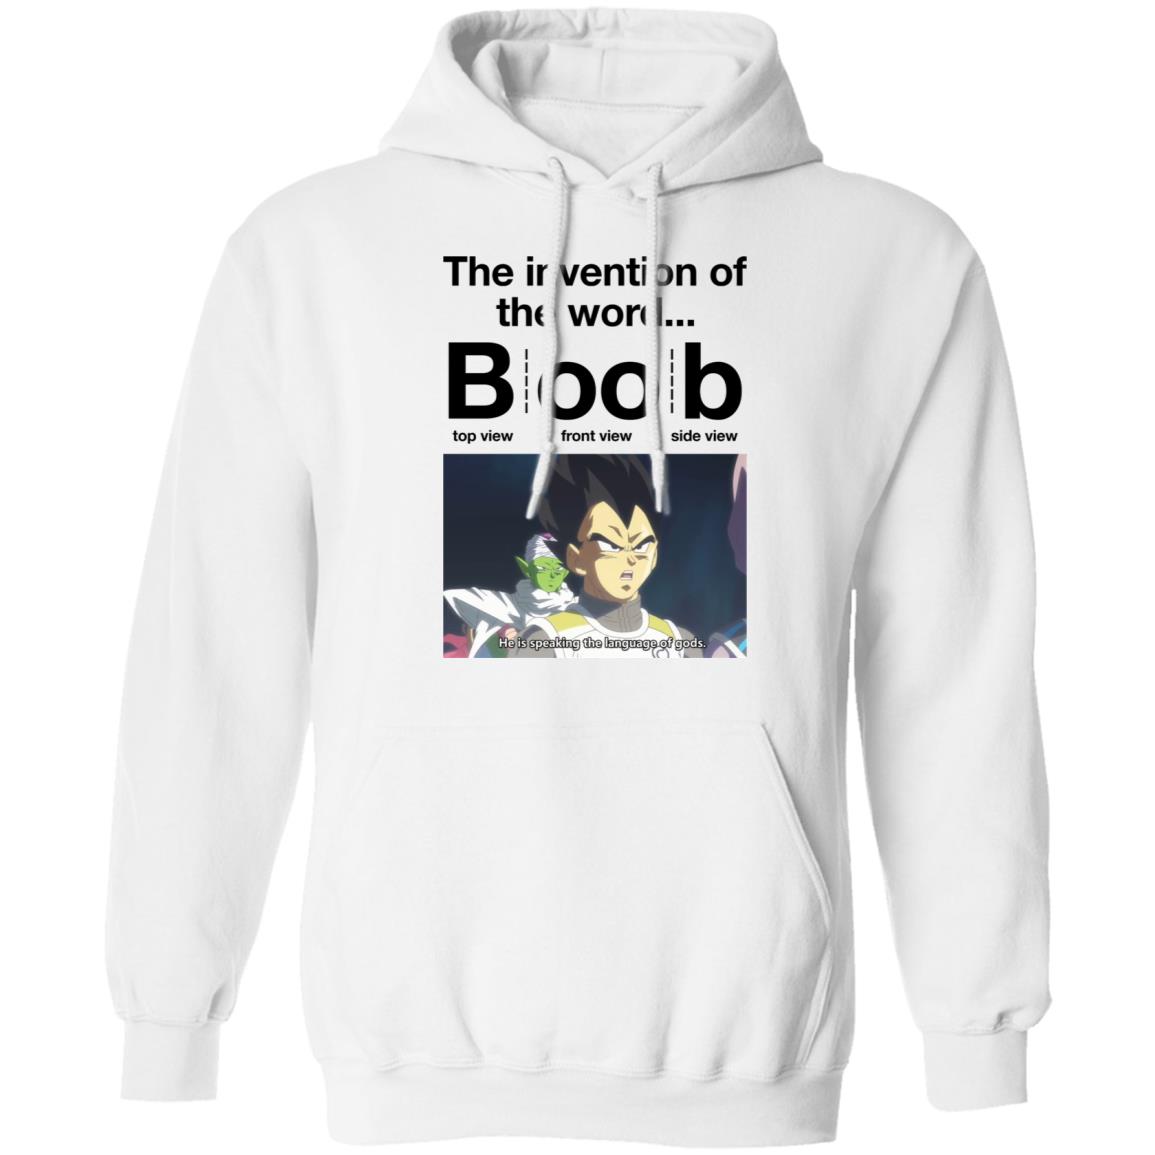 Vegeta And Piccolo The Invention Of The Word Boob Shirt - Lelemoon